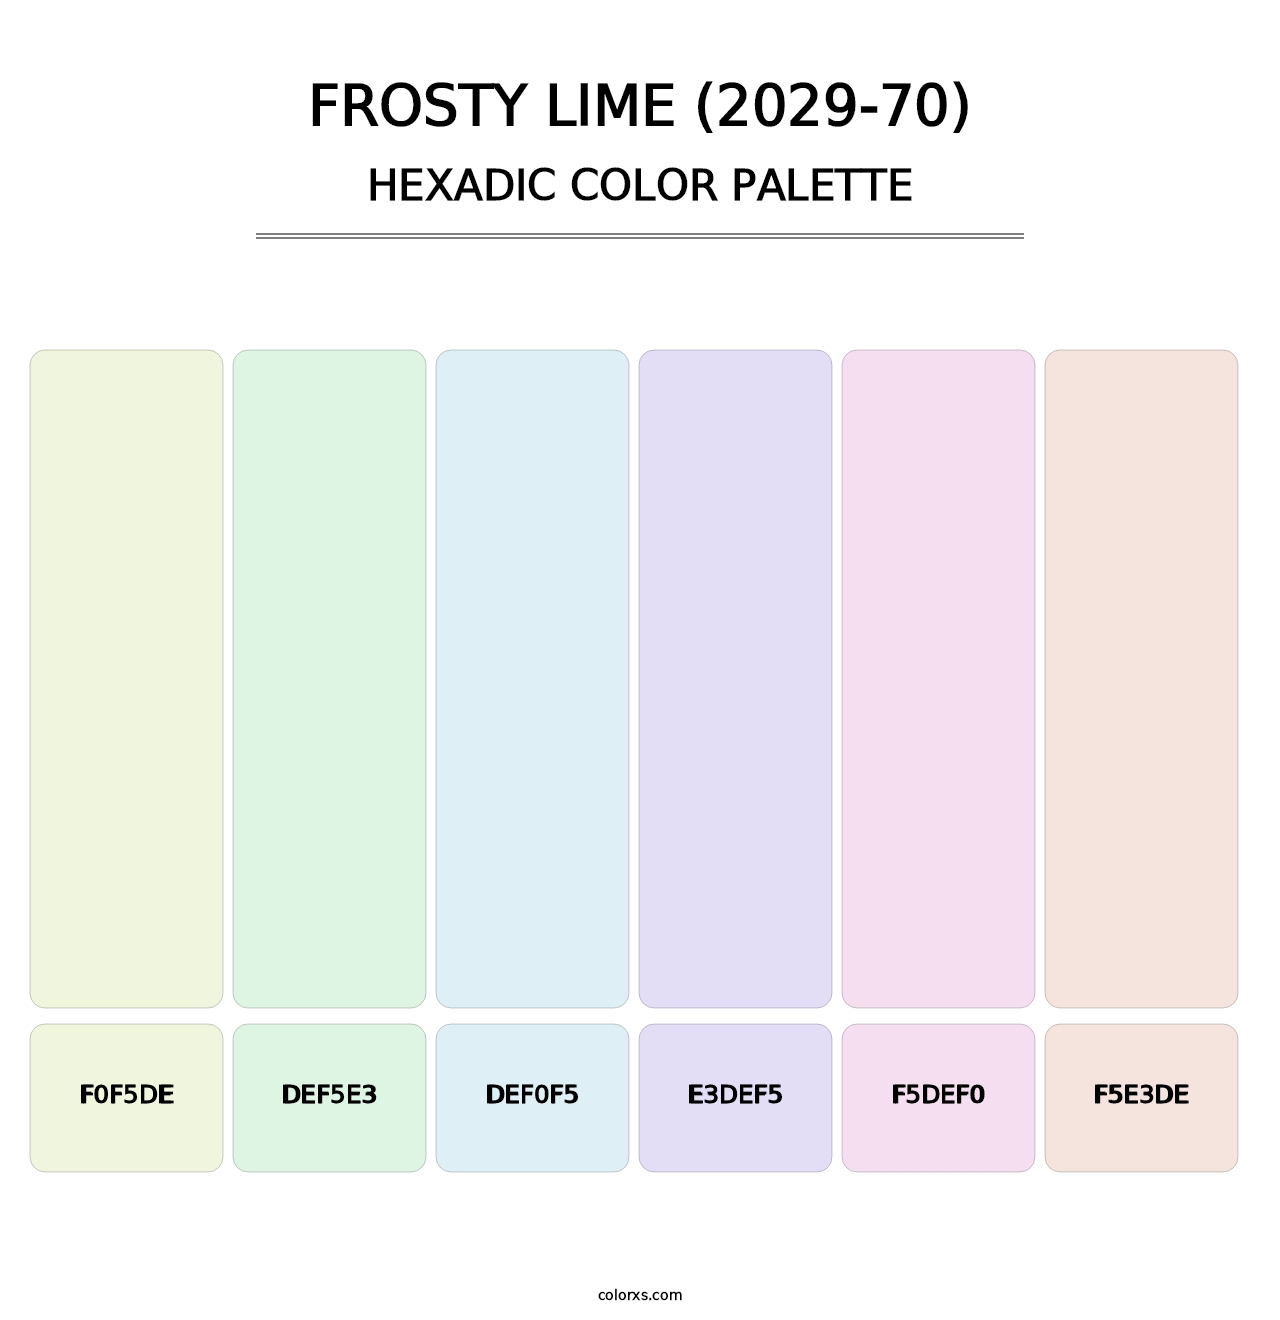 Frosty Lime (2029-70) - Hexadic Color Palette